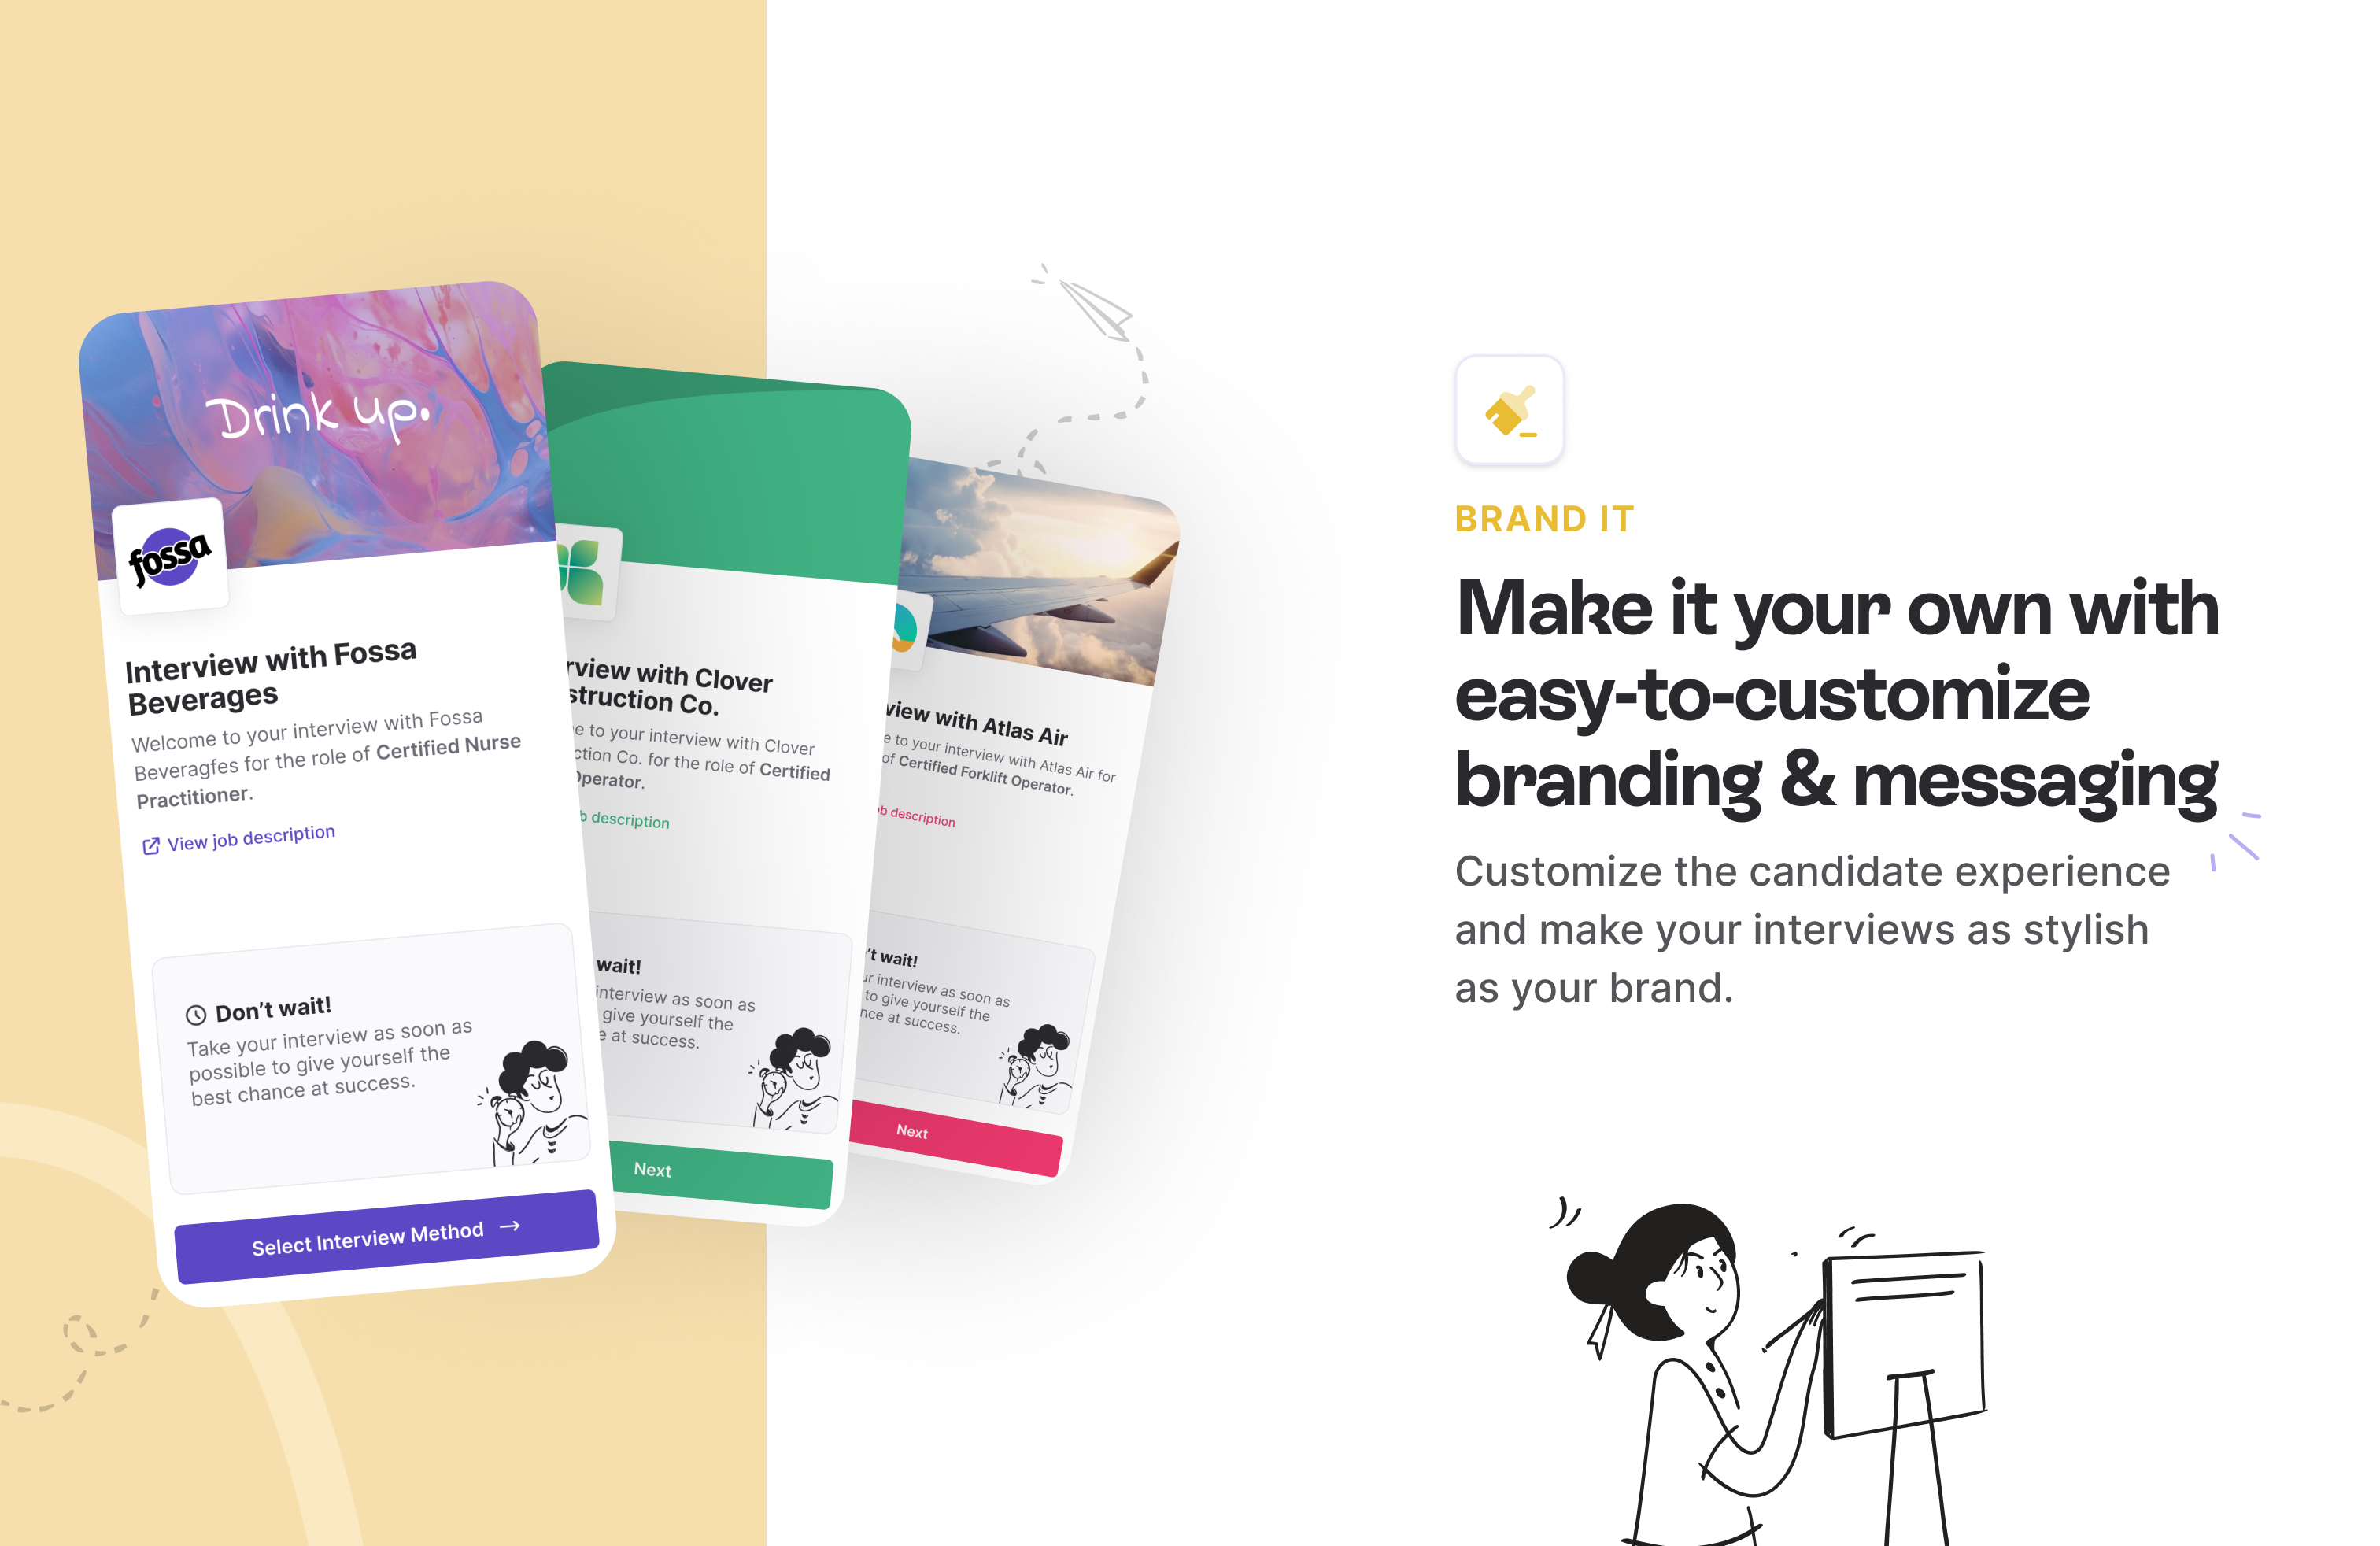 Make it your own with easy-to-customize branding and messaging.